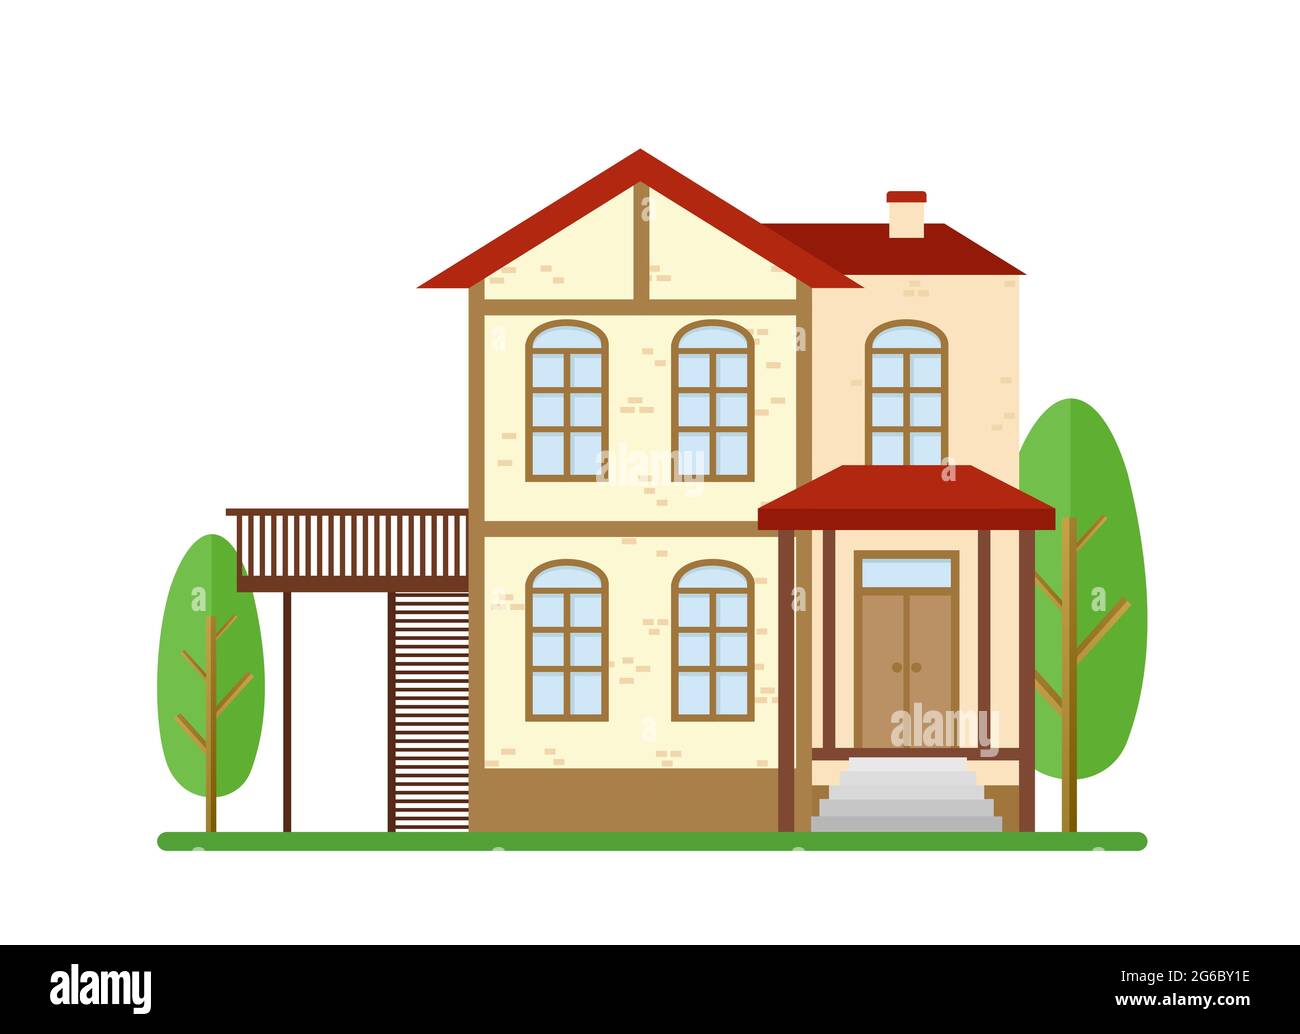 https://c8.alamy.com/comp/2G6BY1E/vector-illustration-modern-house-real-estate-family-home-apartment-cottage-building-concept-in-flat-style-2G6BY1E.jpg